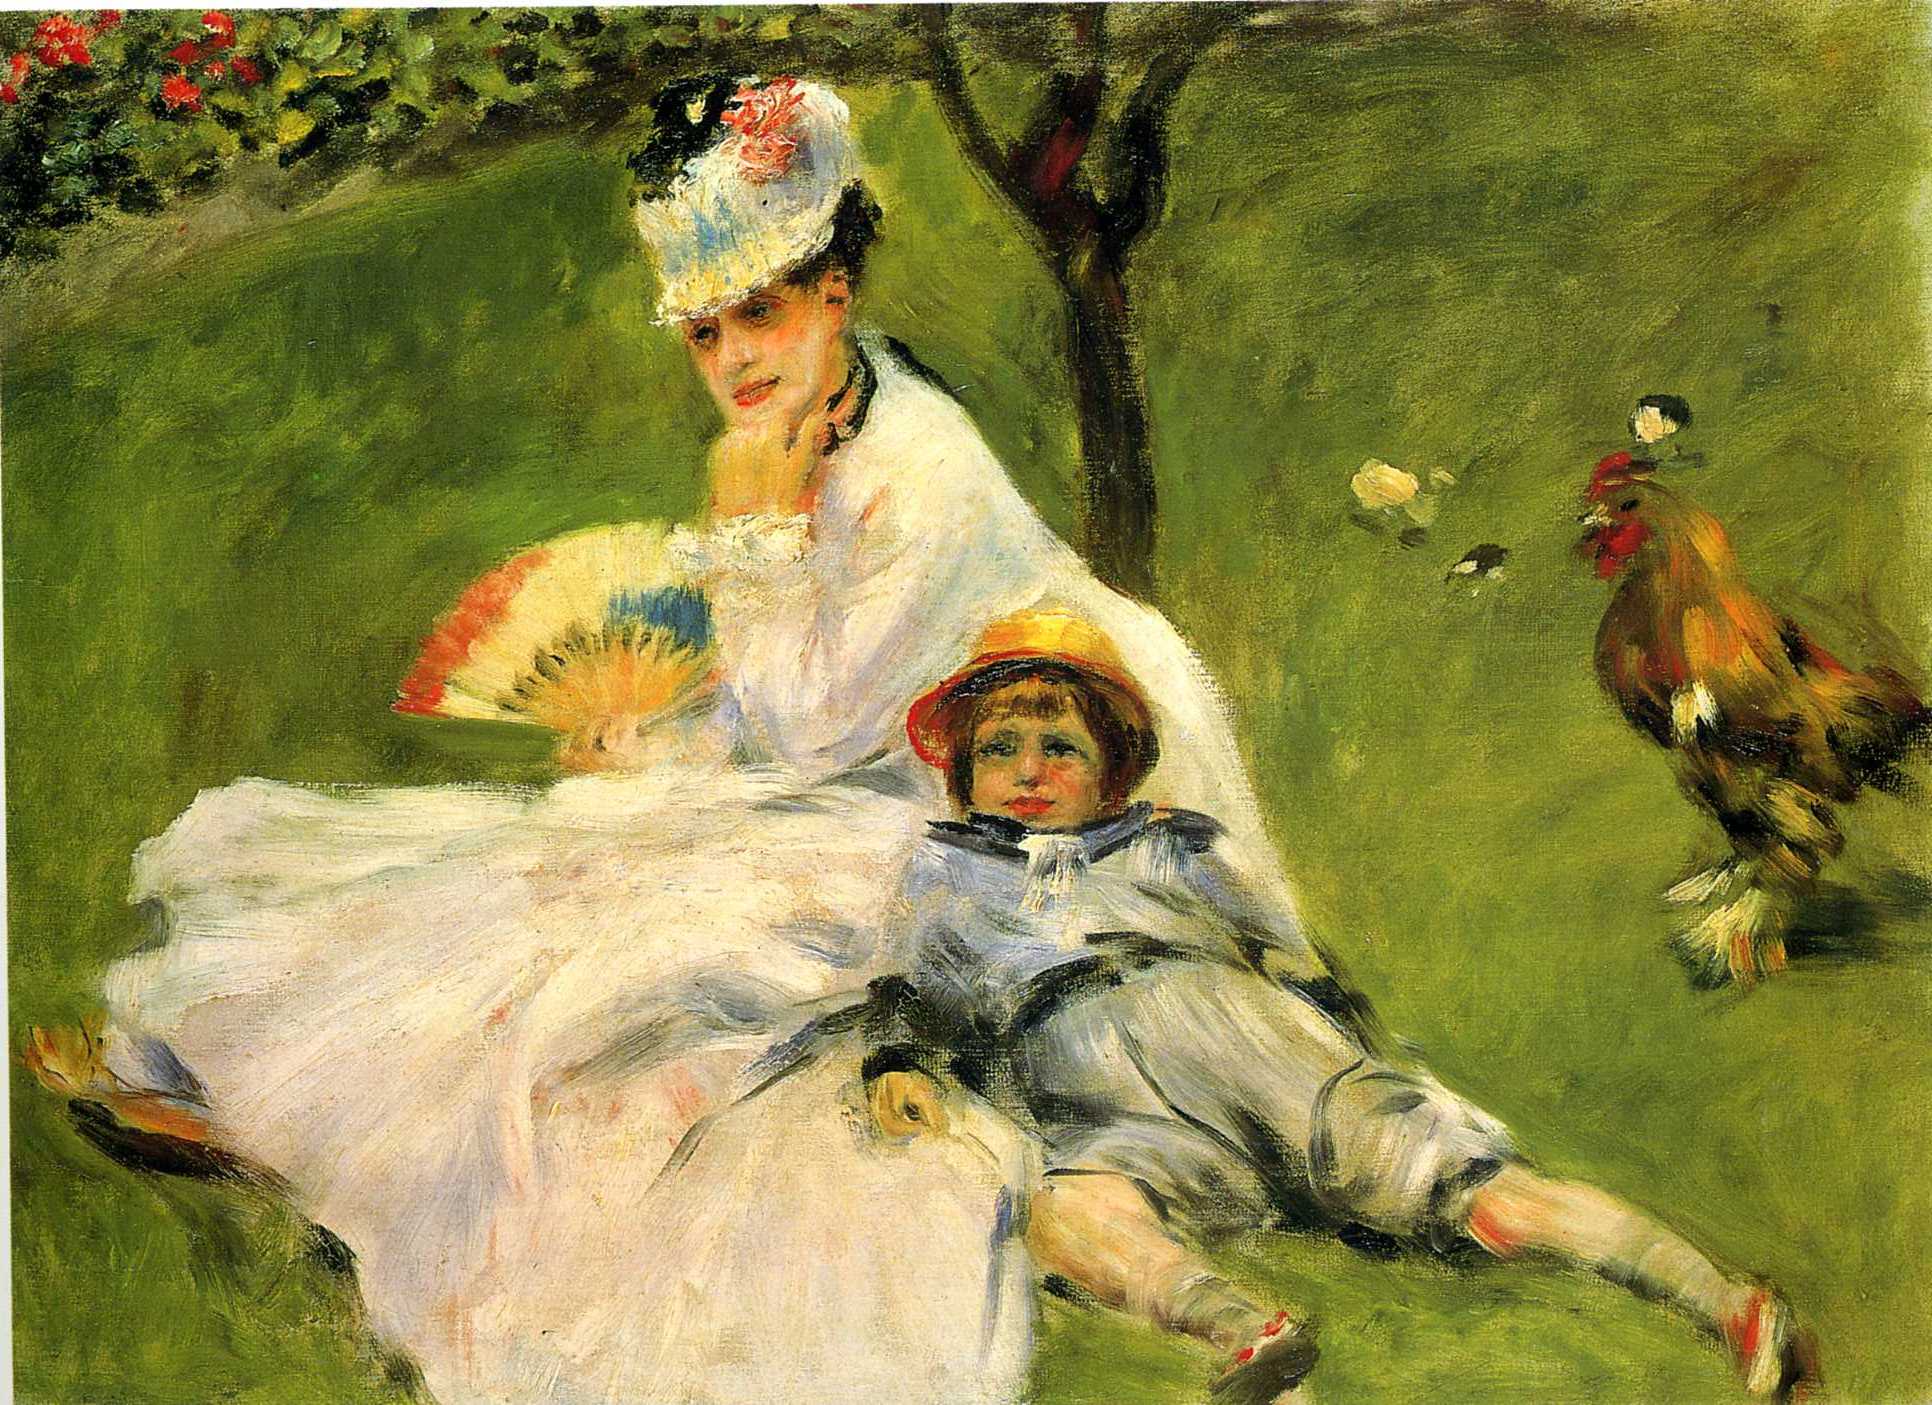 Camille Monet and Her Son Jean in the Garden at Argenteuil by Pierre-Auguste Renoir - 1874 - - National Gallery of Art